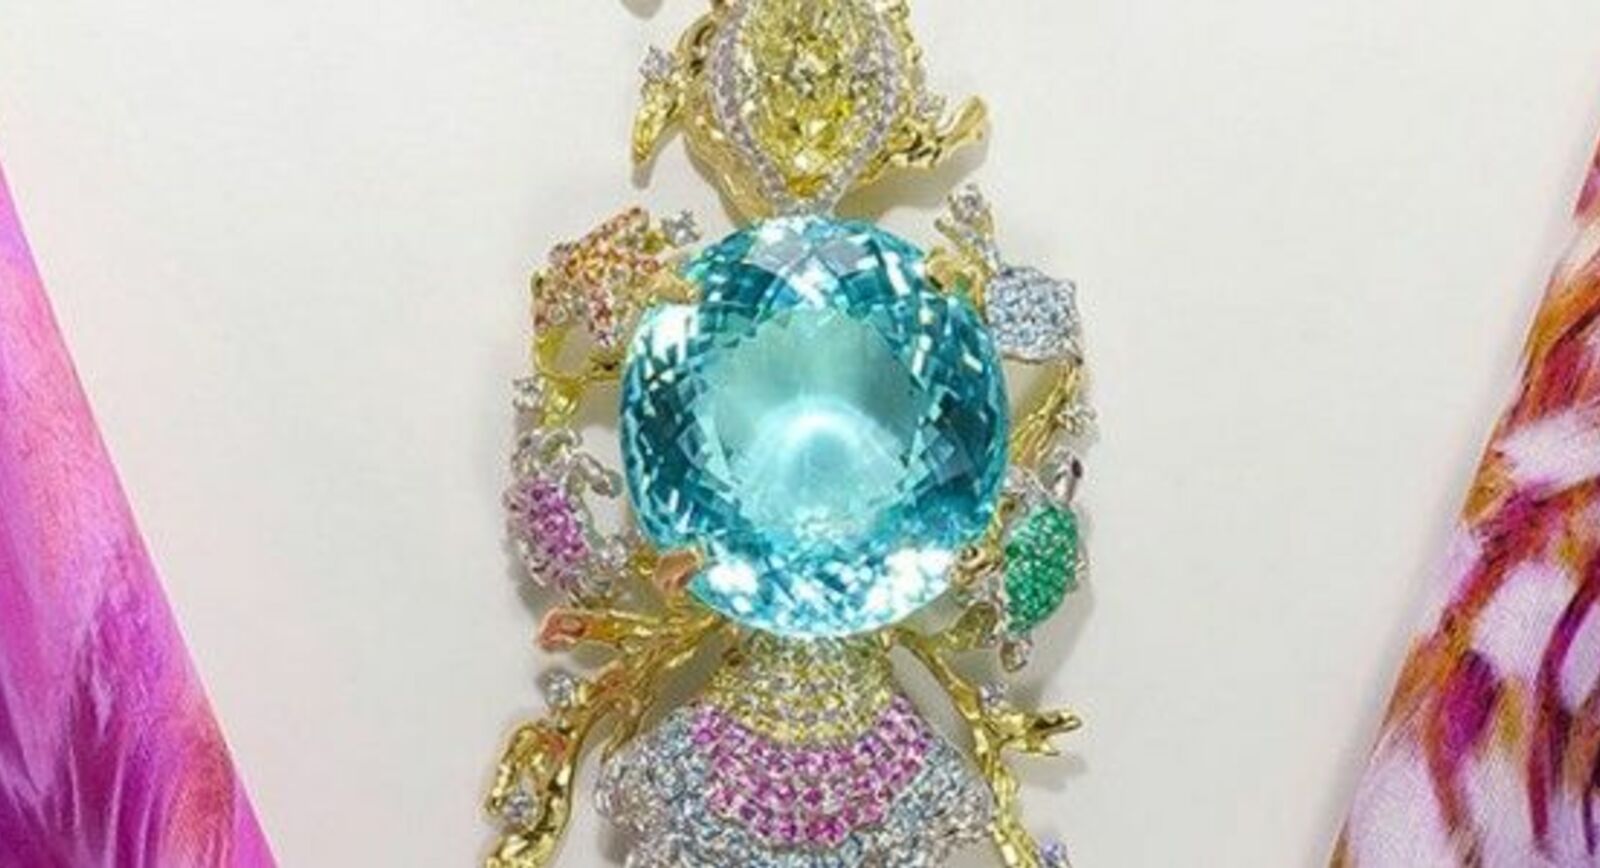 “The Ethereal Carolina Divine Paraiba”- of the most precious gifts given by mother nature to mankind